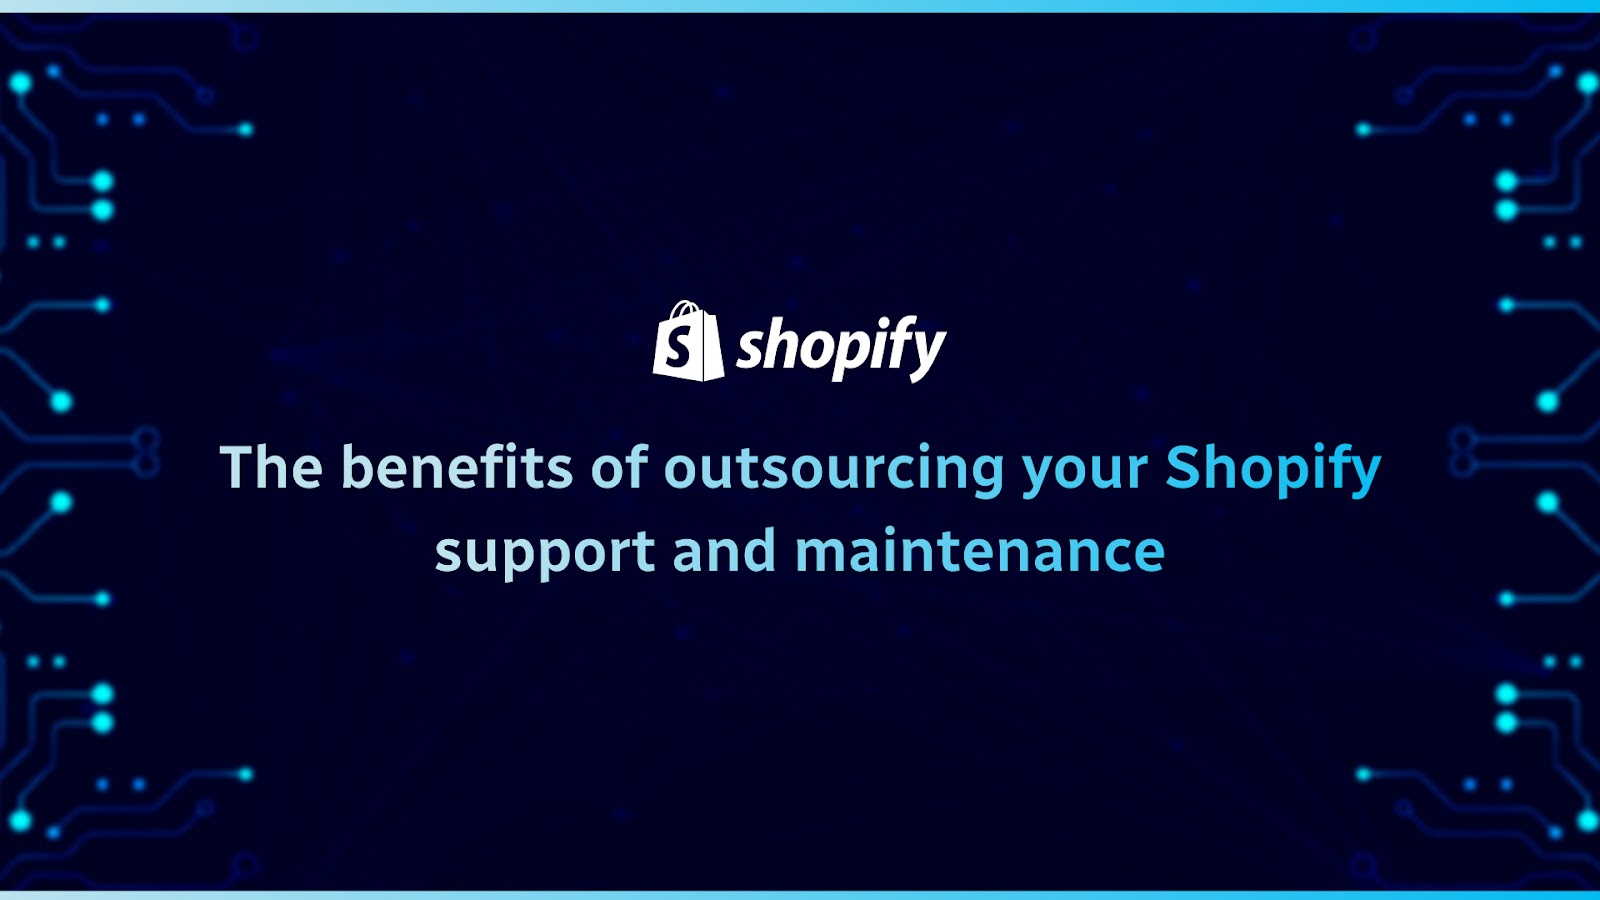 The benefits of outsourcing your Shopify support and maintenance